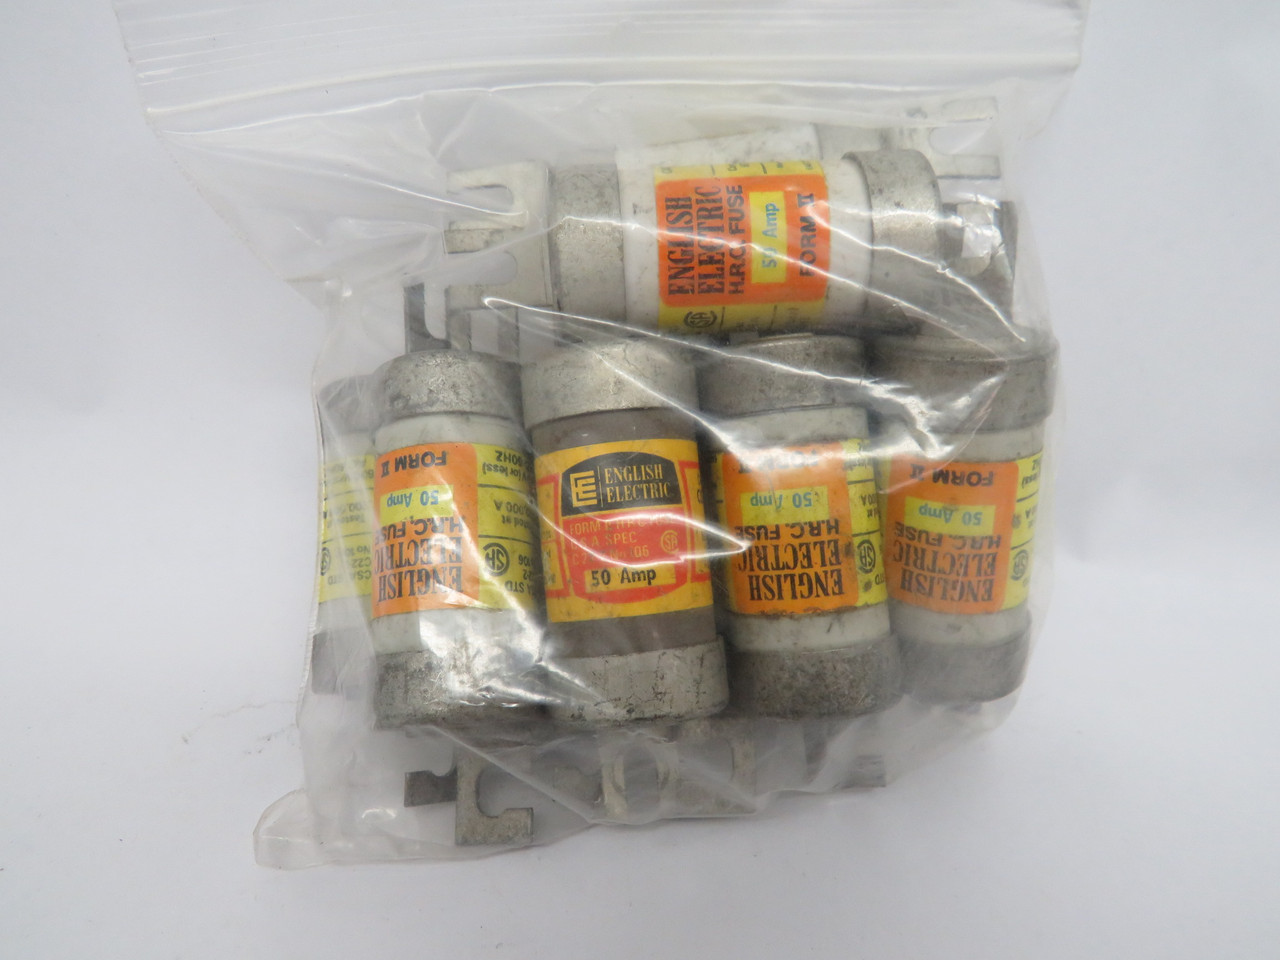 English Electric CIS-50 Bolt-On Fuse 50A 600V Open Hole Lot of 10 USED